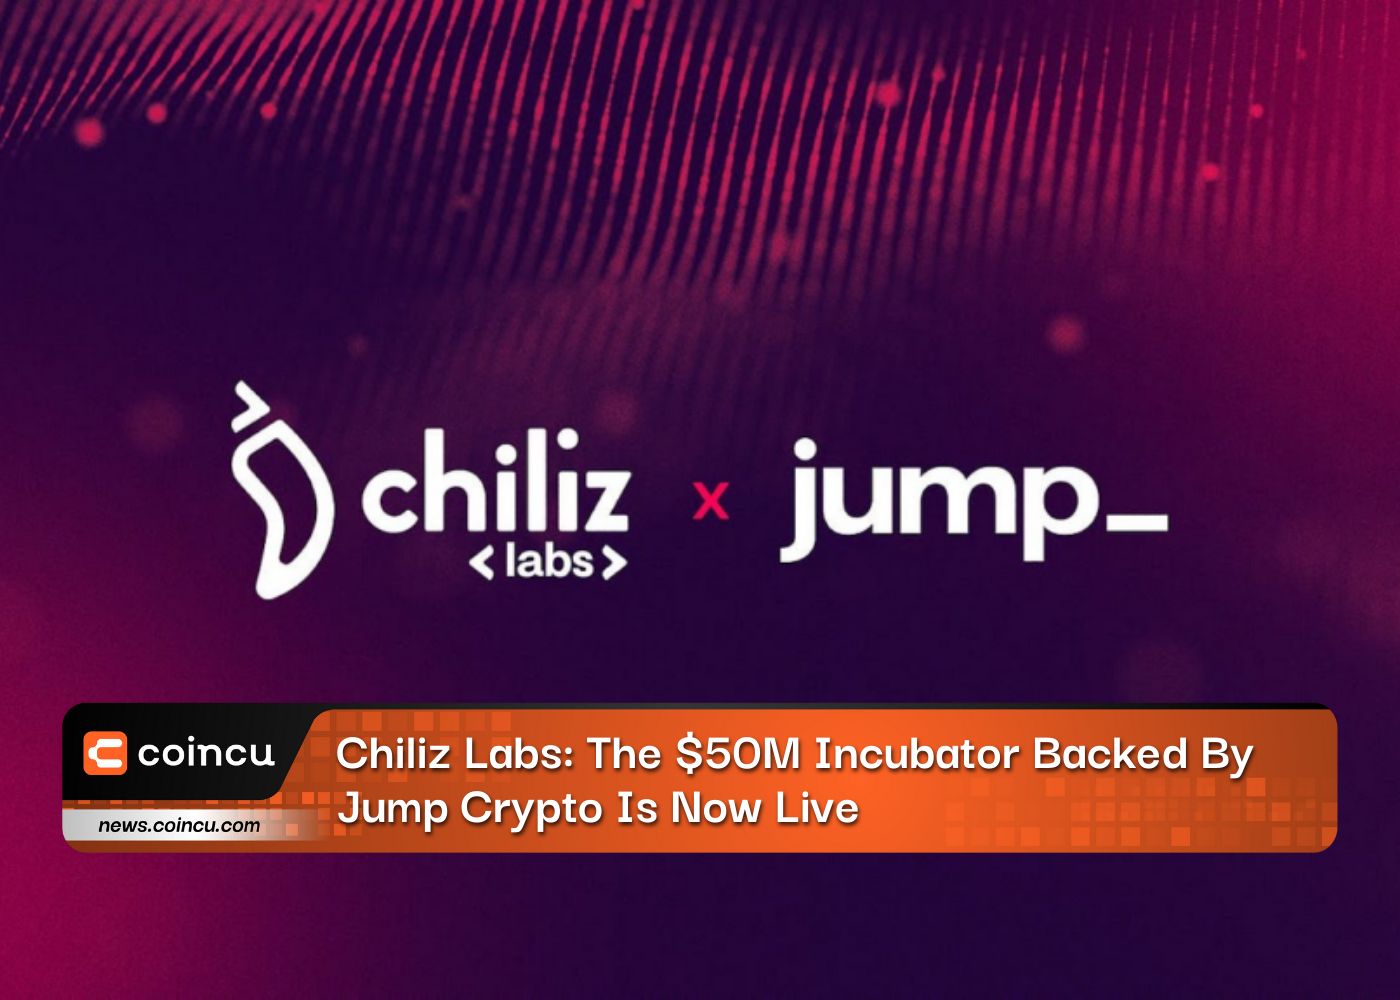 Chiliz Labs: The $50M Incubator Backed By Jump Crypto Is Now Live